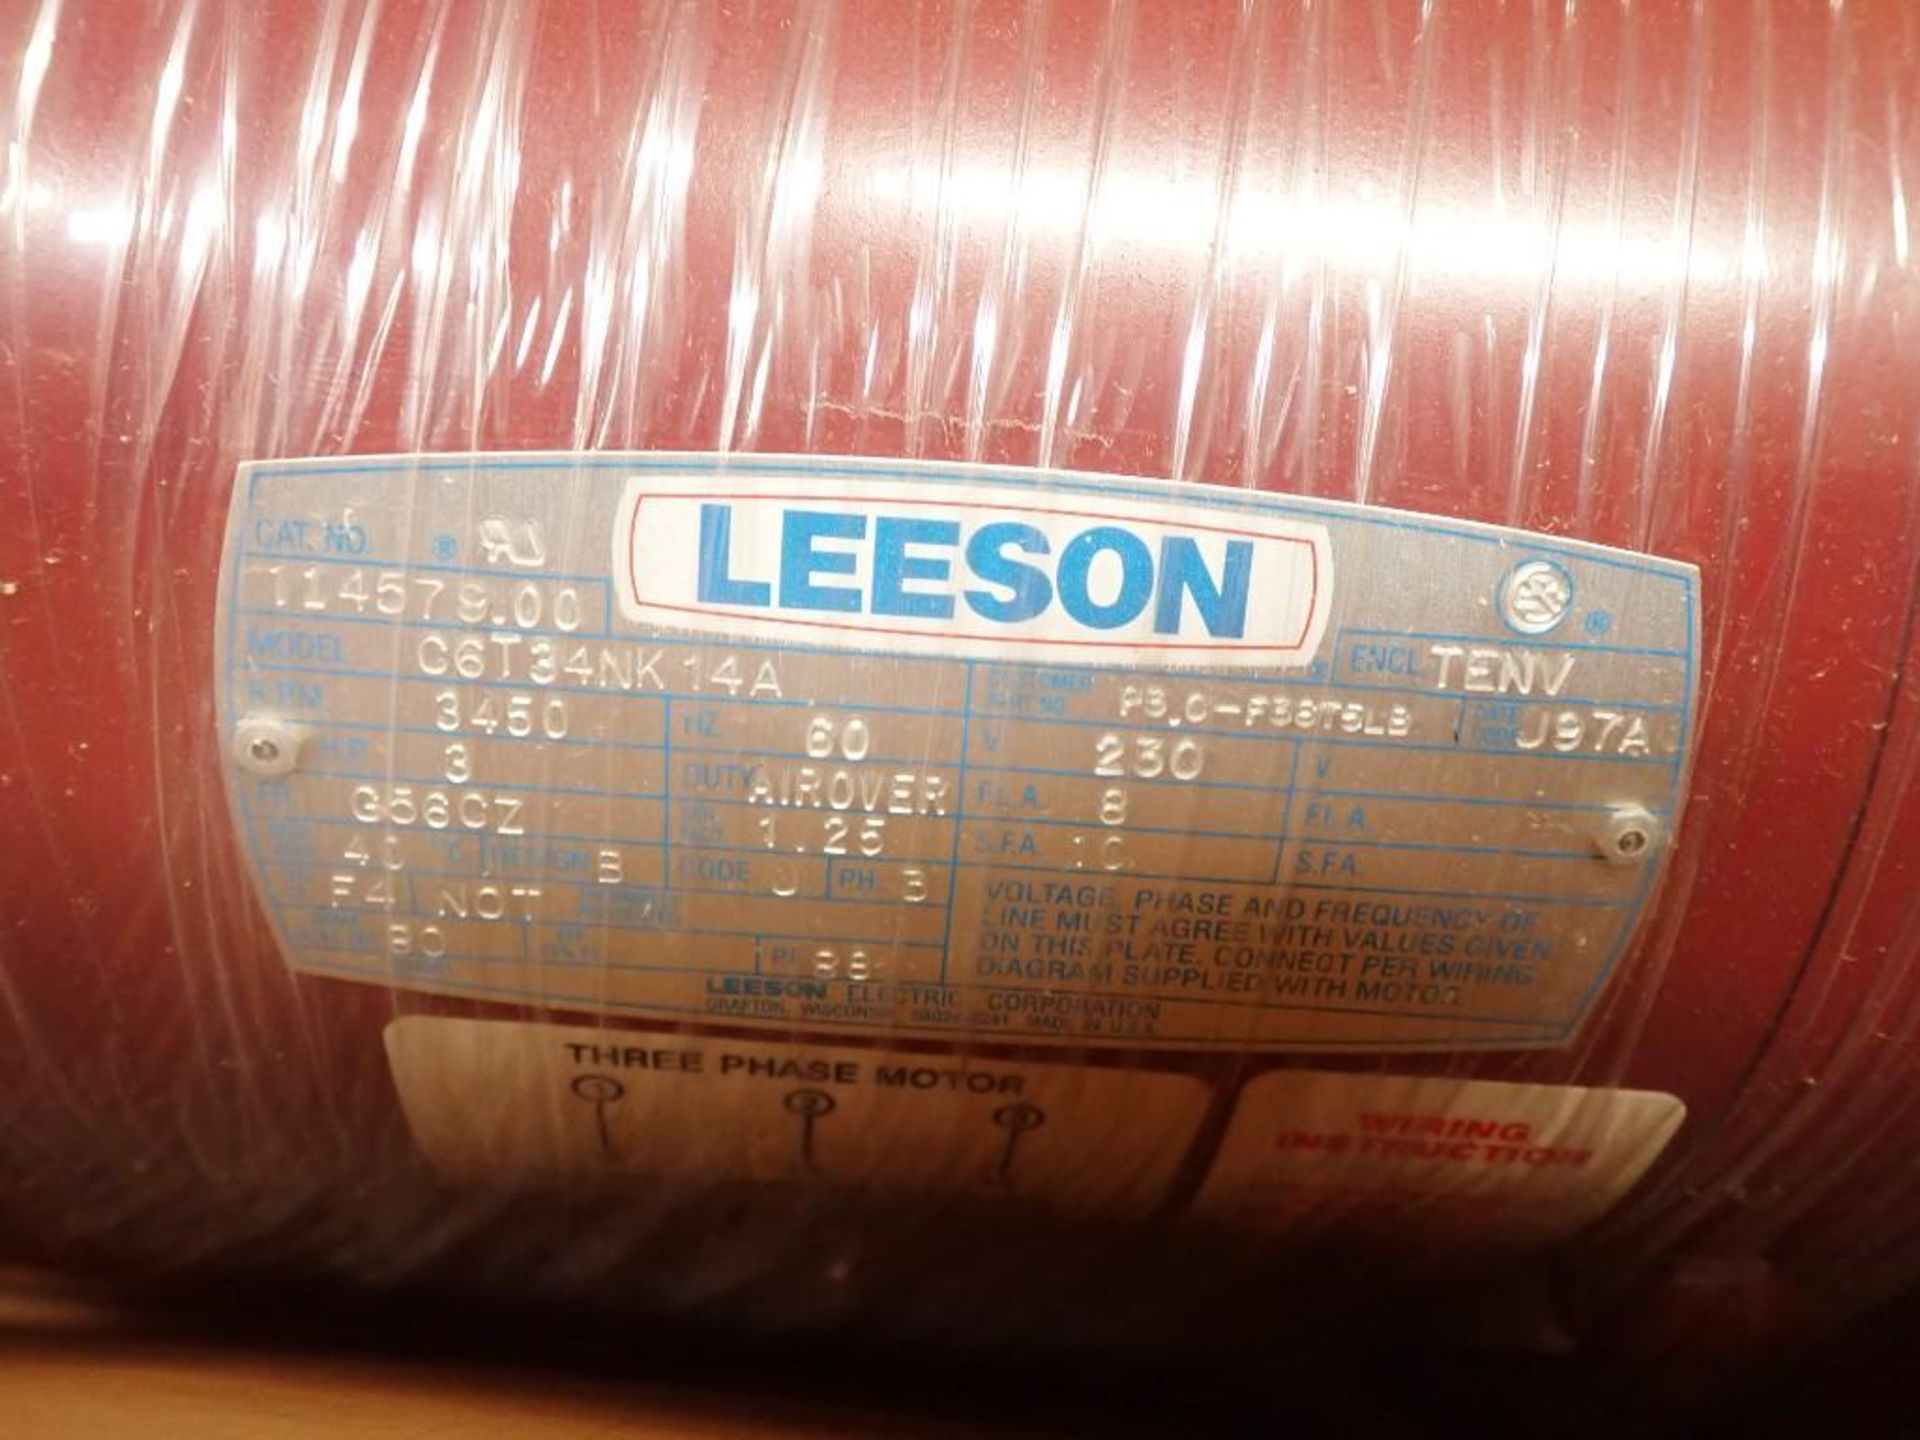 NEW Leeson 3 HP, Electric Motor, C6T34NK14A, 3450 RPM, 230V - Image 3 of 4